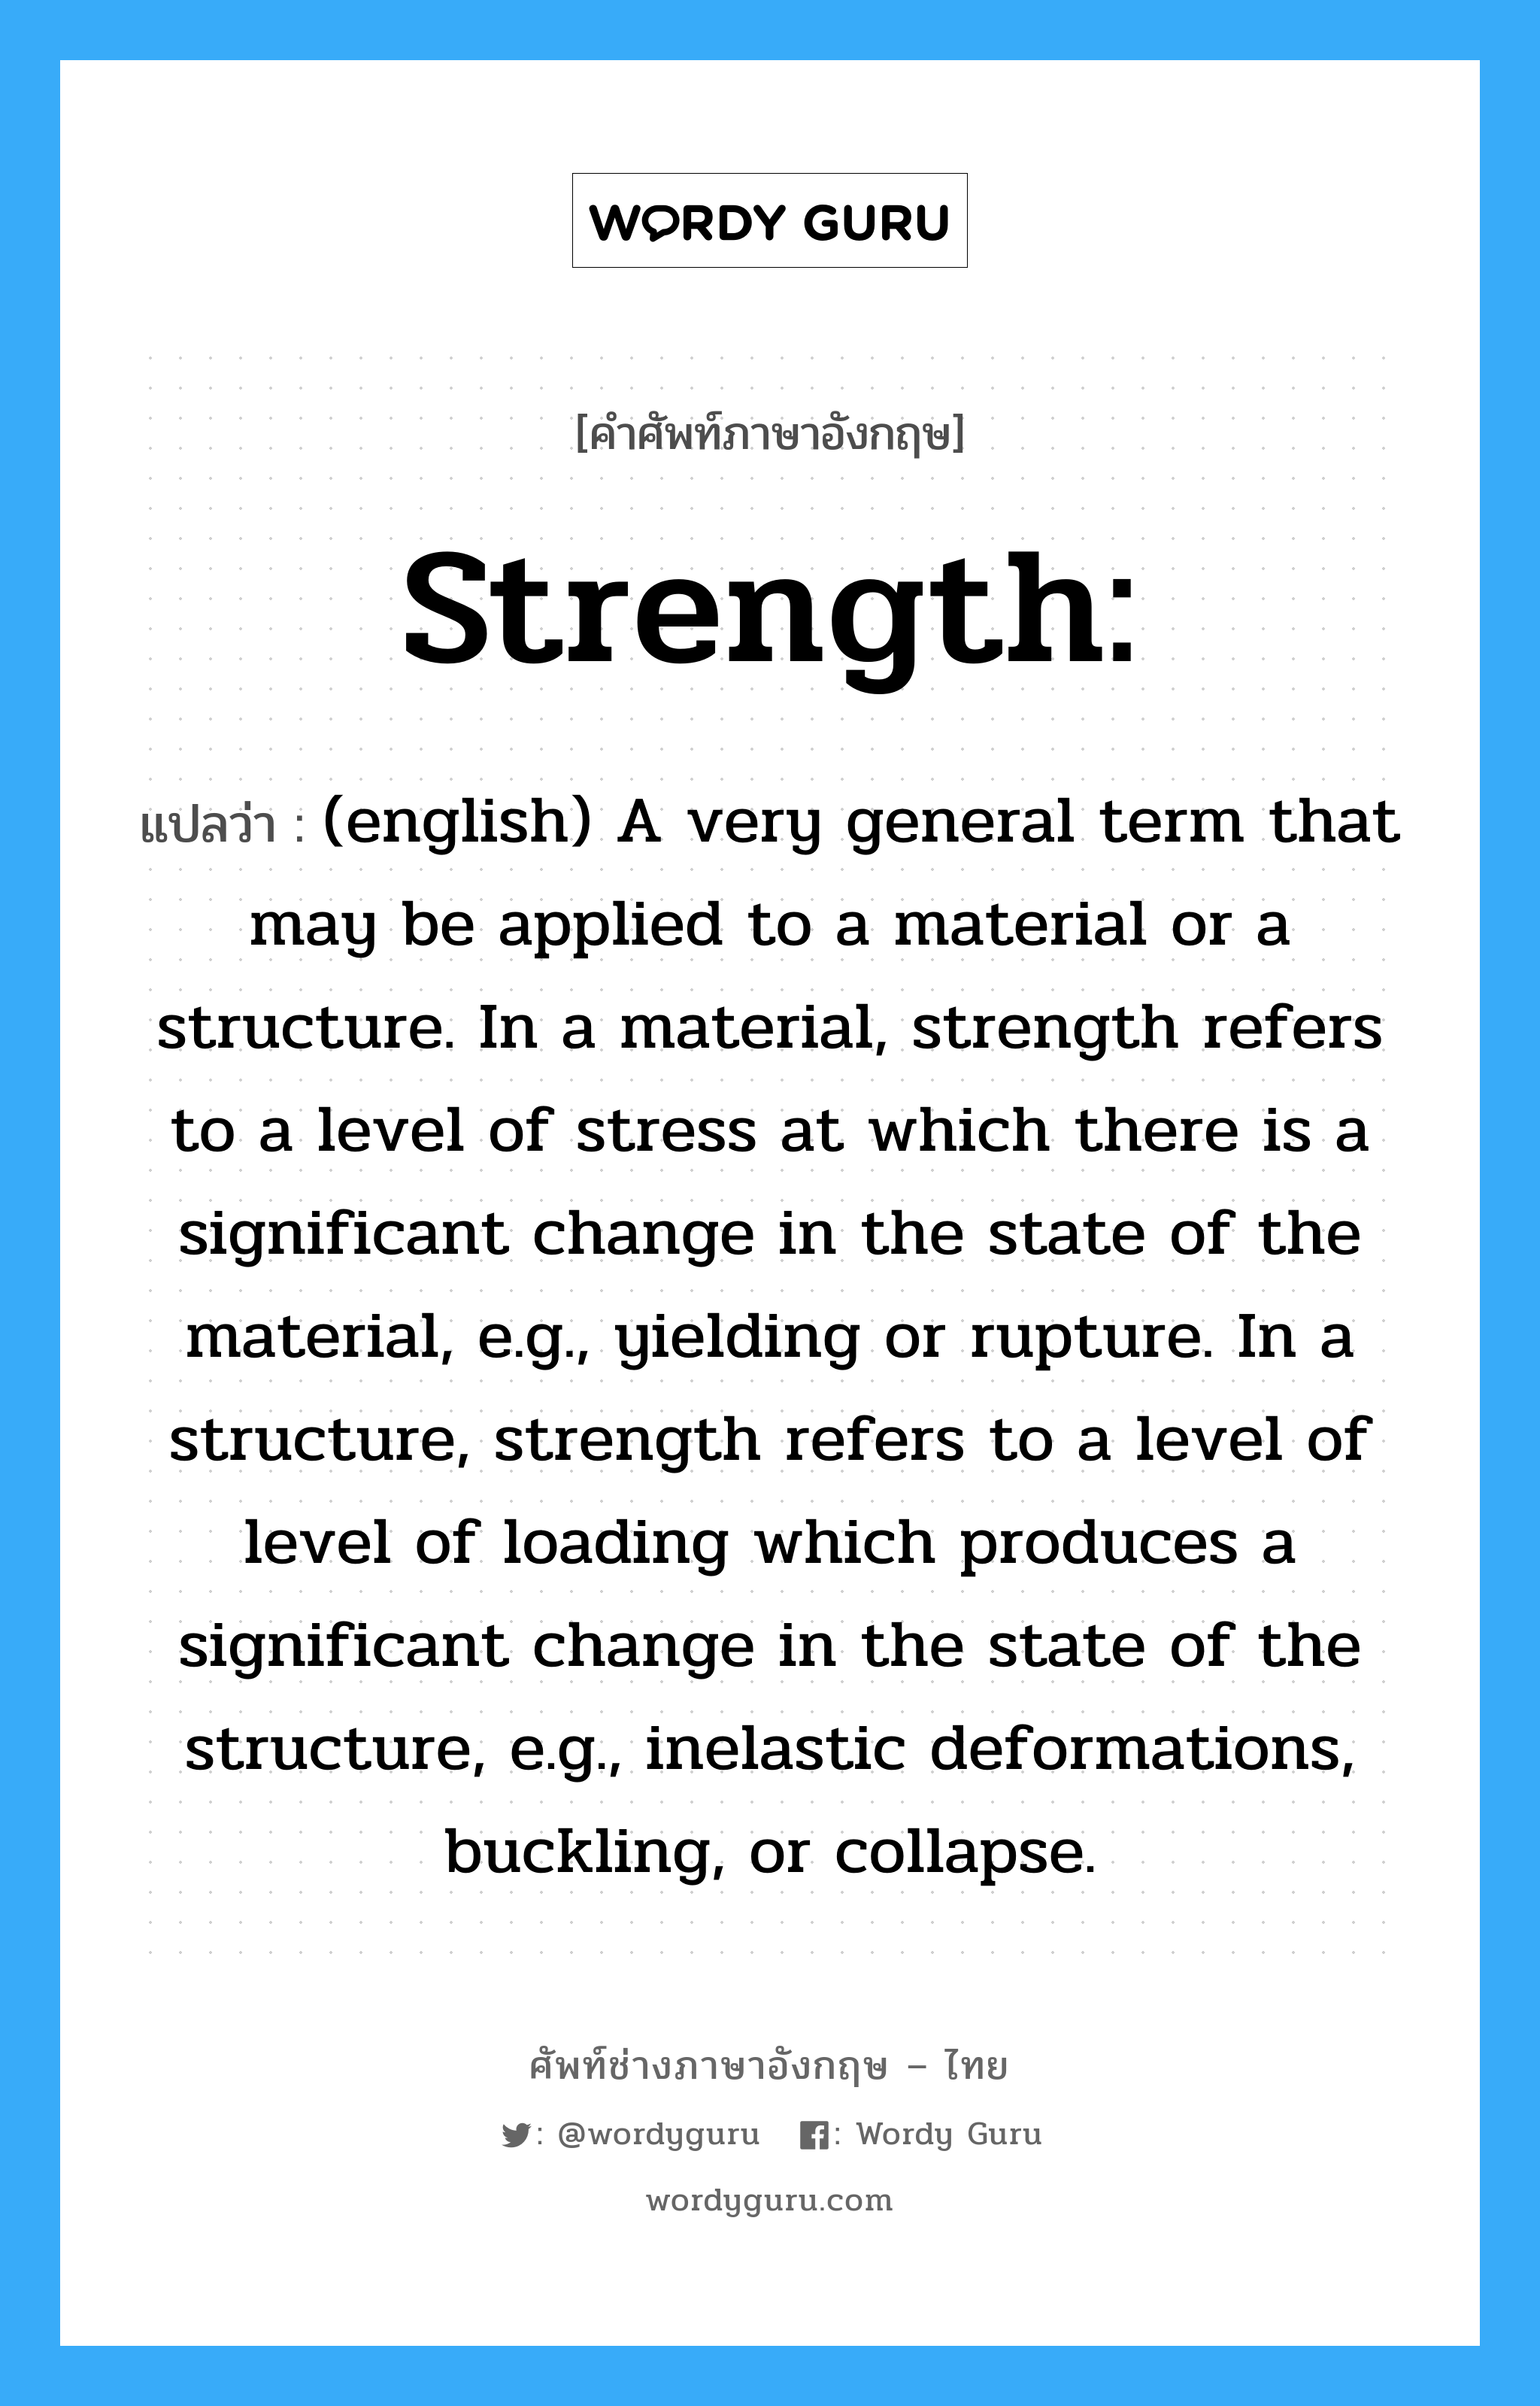 (english) A very general term that may be applied to a material or a structure. In a material, strength refers to a level of stress at which there is a significant change in the state of the material, e.g., yielding or rupture. In a structure, strength refers to a level of level of loading which produces a significant change in the state of the structure, e.g., inelastic deformations, buckling, or collapse. ภาษาอังกฤษ?, คำศัพท์ช่างภาษาอังกฤษ - ไทย (english) A very general term that may be applied to a material or a structure. In a material, strength refers to a level of stress at which there is a significant change in the state of the material, e.g., yielding or rupture. In a structure, strength refers to a level of level of loading which produces a significant change in the state of the structure, e.g., inelastic deformations, buckling, or collapse. คำศัพท์ภาษาอังกฤษ (english) A very general term that may be applied to a material or a structure. In a material, strength refers to a level of stress at which there is a significant change in the state of the material, e.g., yielding or rupture. In a structure, strength refers to a level of level of loading which produces a significant change in the state of the structure, e.g., inelastic deformations, buckling, or collapse. แปลว่า Strength: